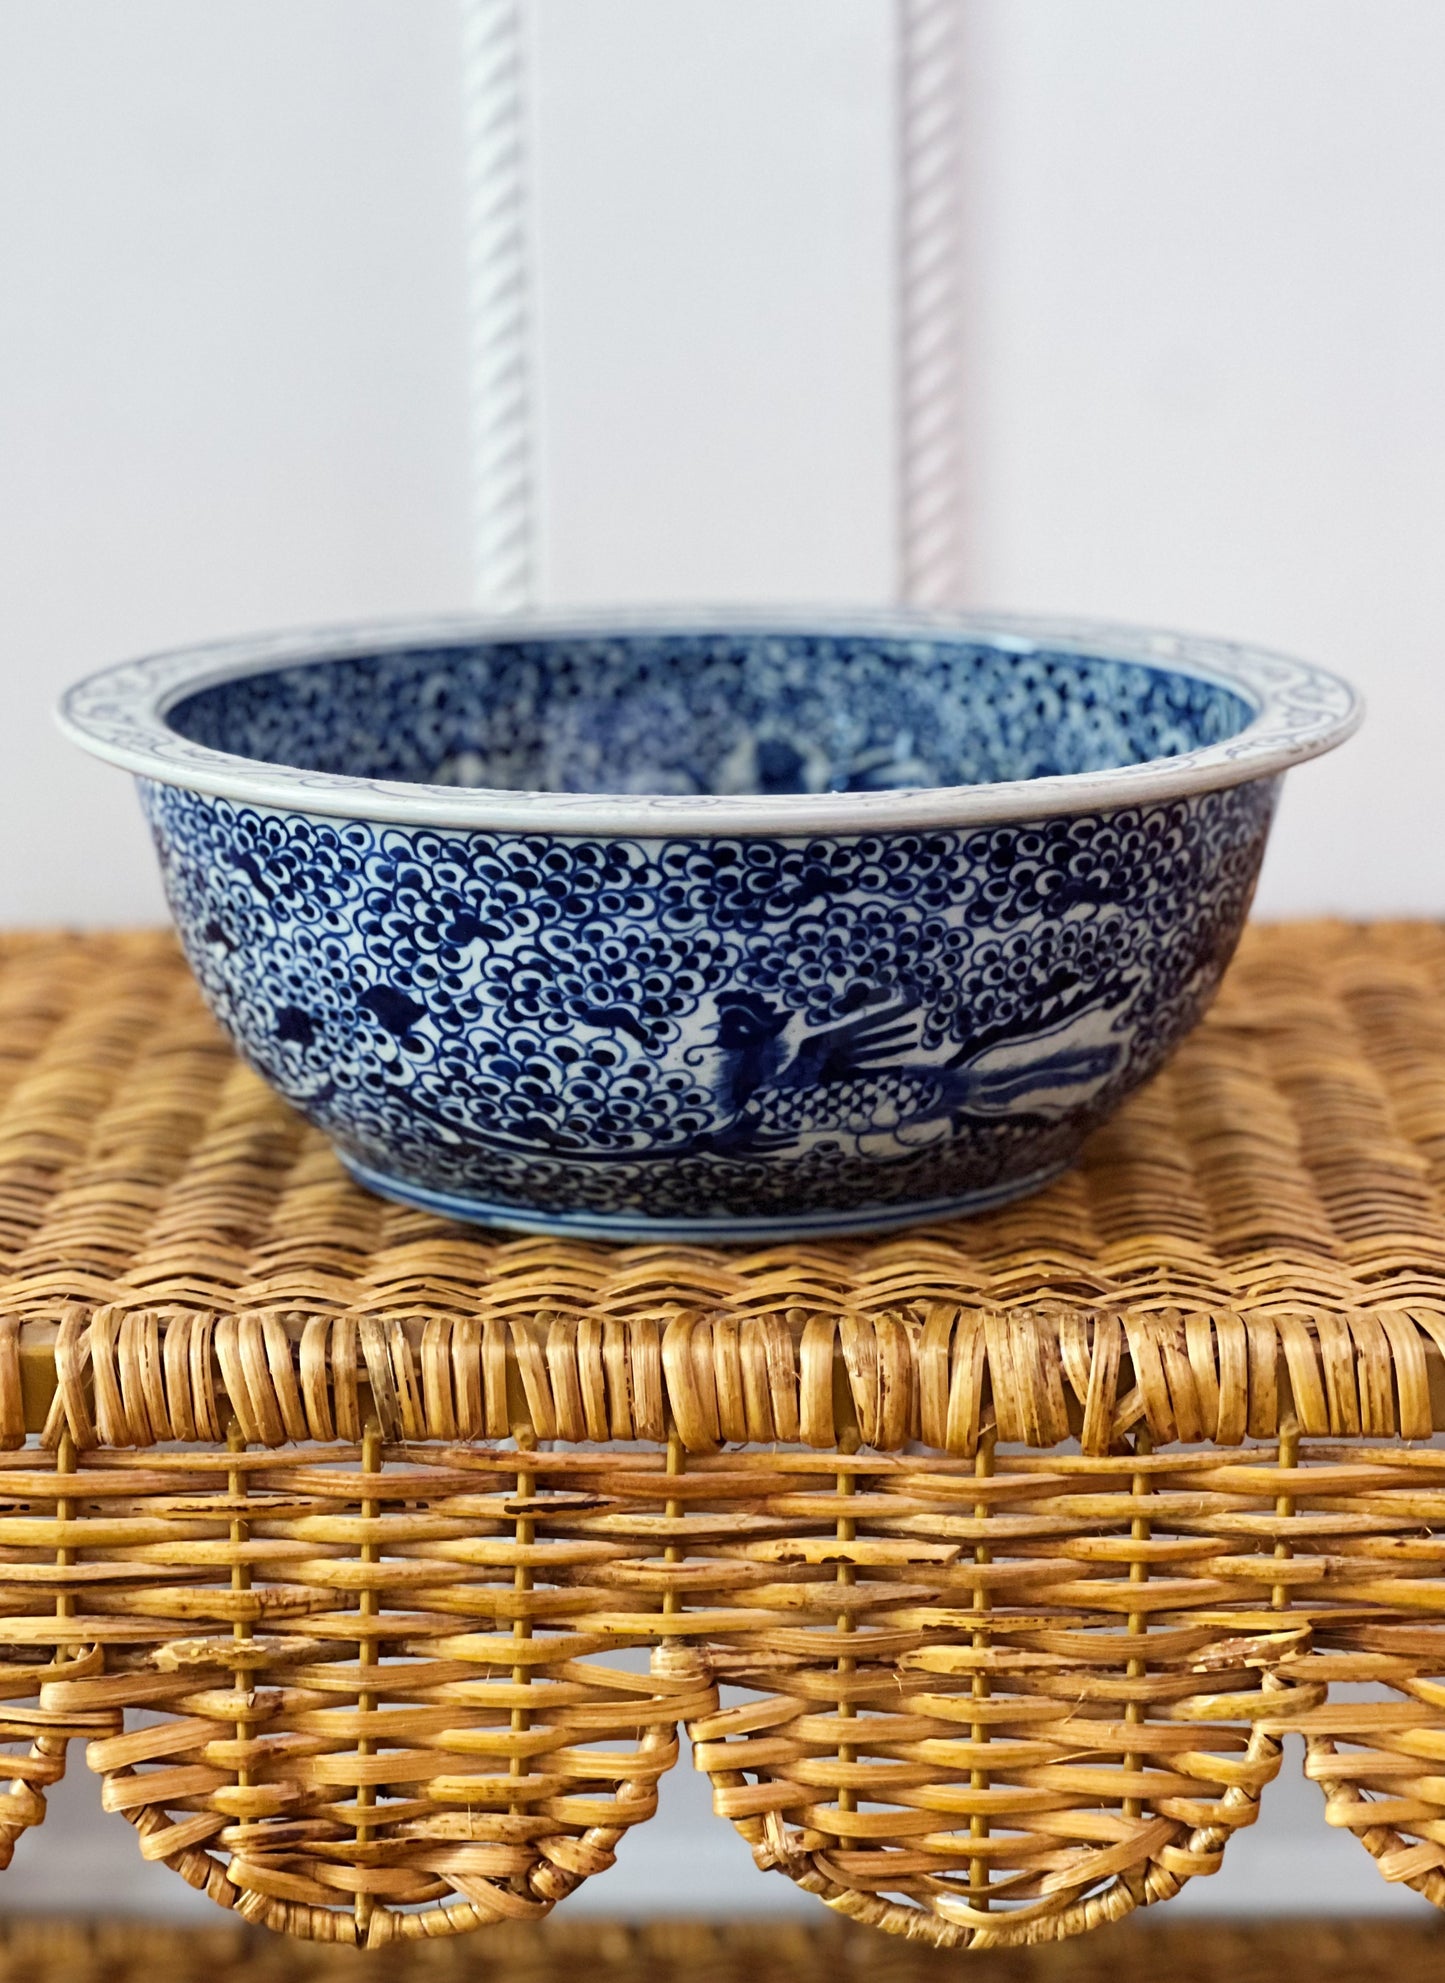 blue and white basin bowl on a wicker shelf